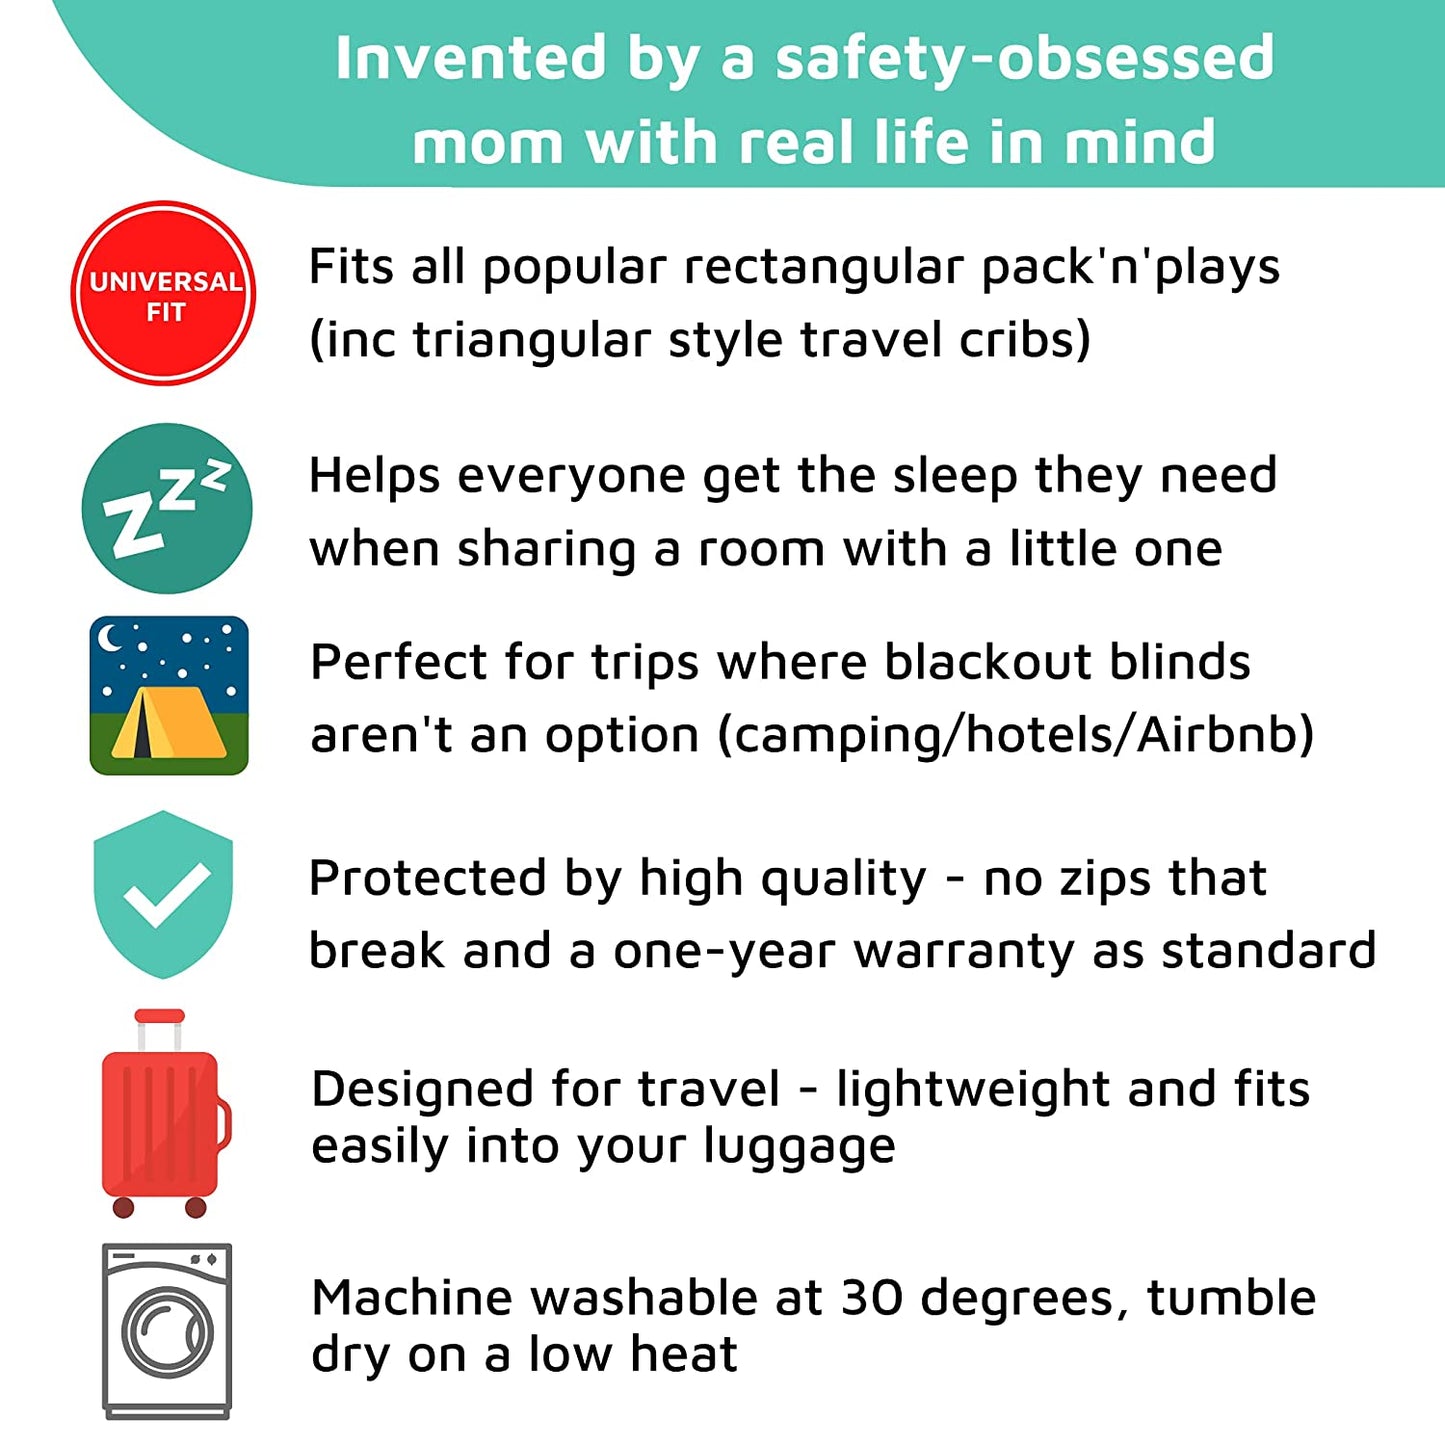 SnoozeShade Pack N Play Blackout Travel Crib Canopy Cover and Tent | Breathable Net Sleep Shade | Blocks 94% of Light | Award-Winning British Design - (For 4 piece(s))